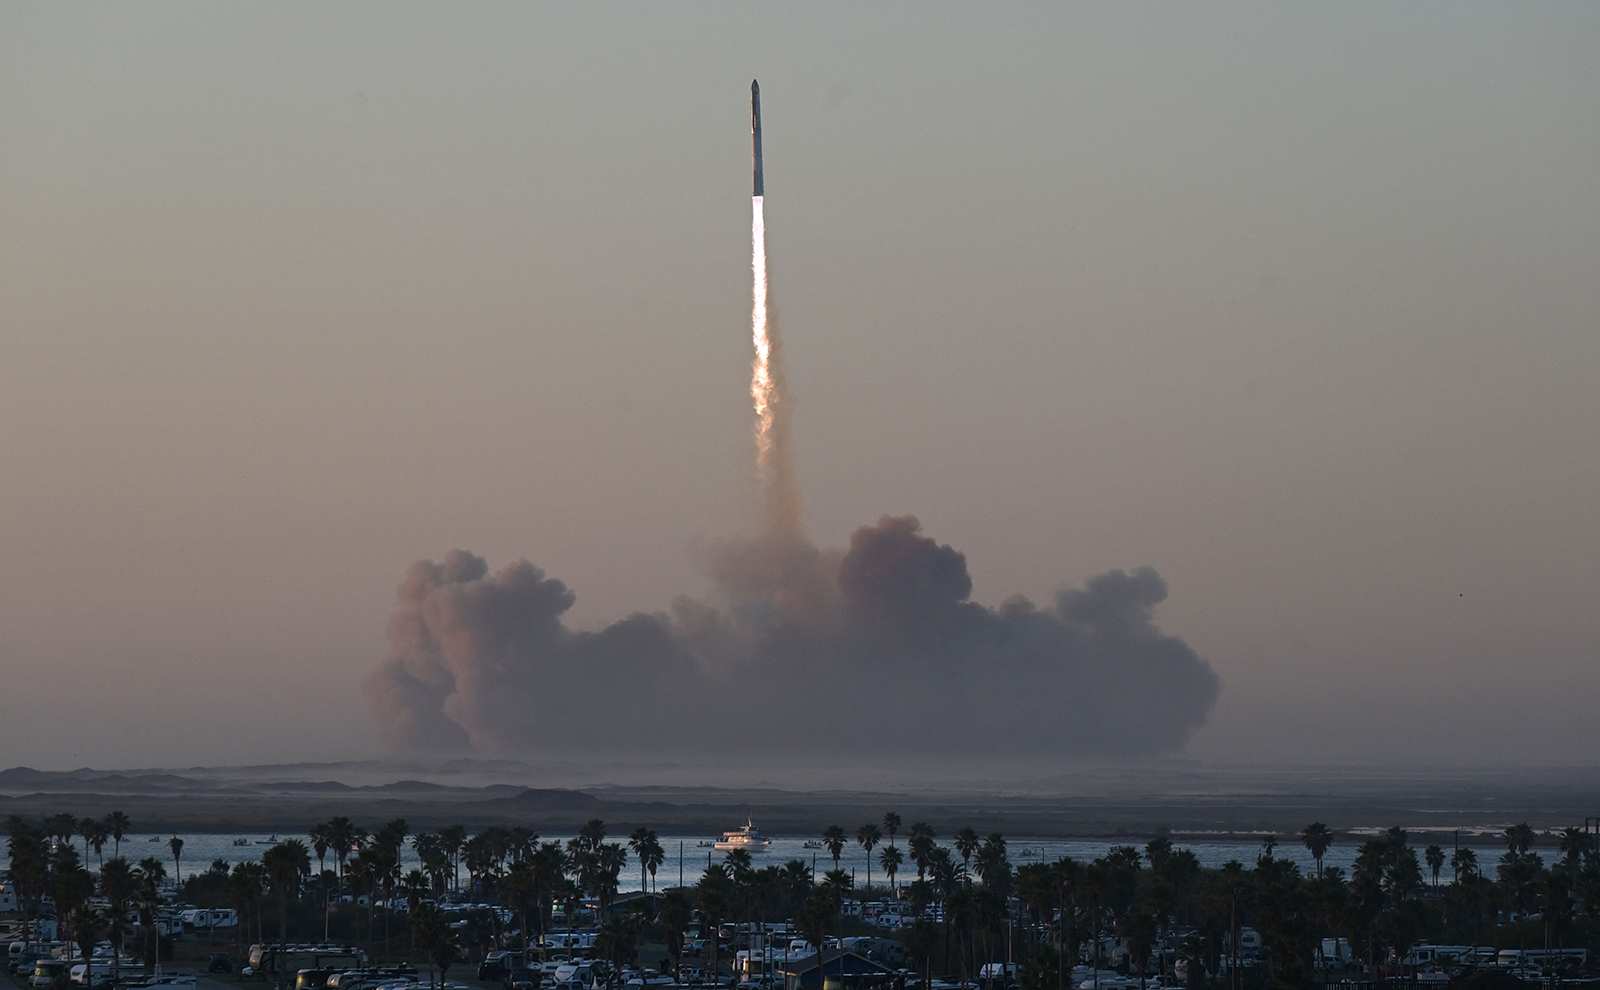 US military hopes one day to move supplies, maybe troops, on SpaceX’s Starship